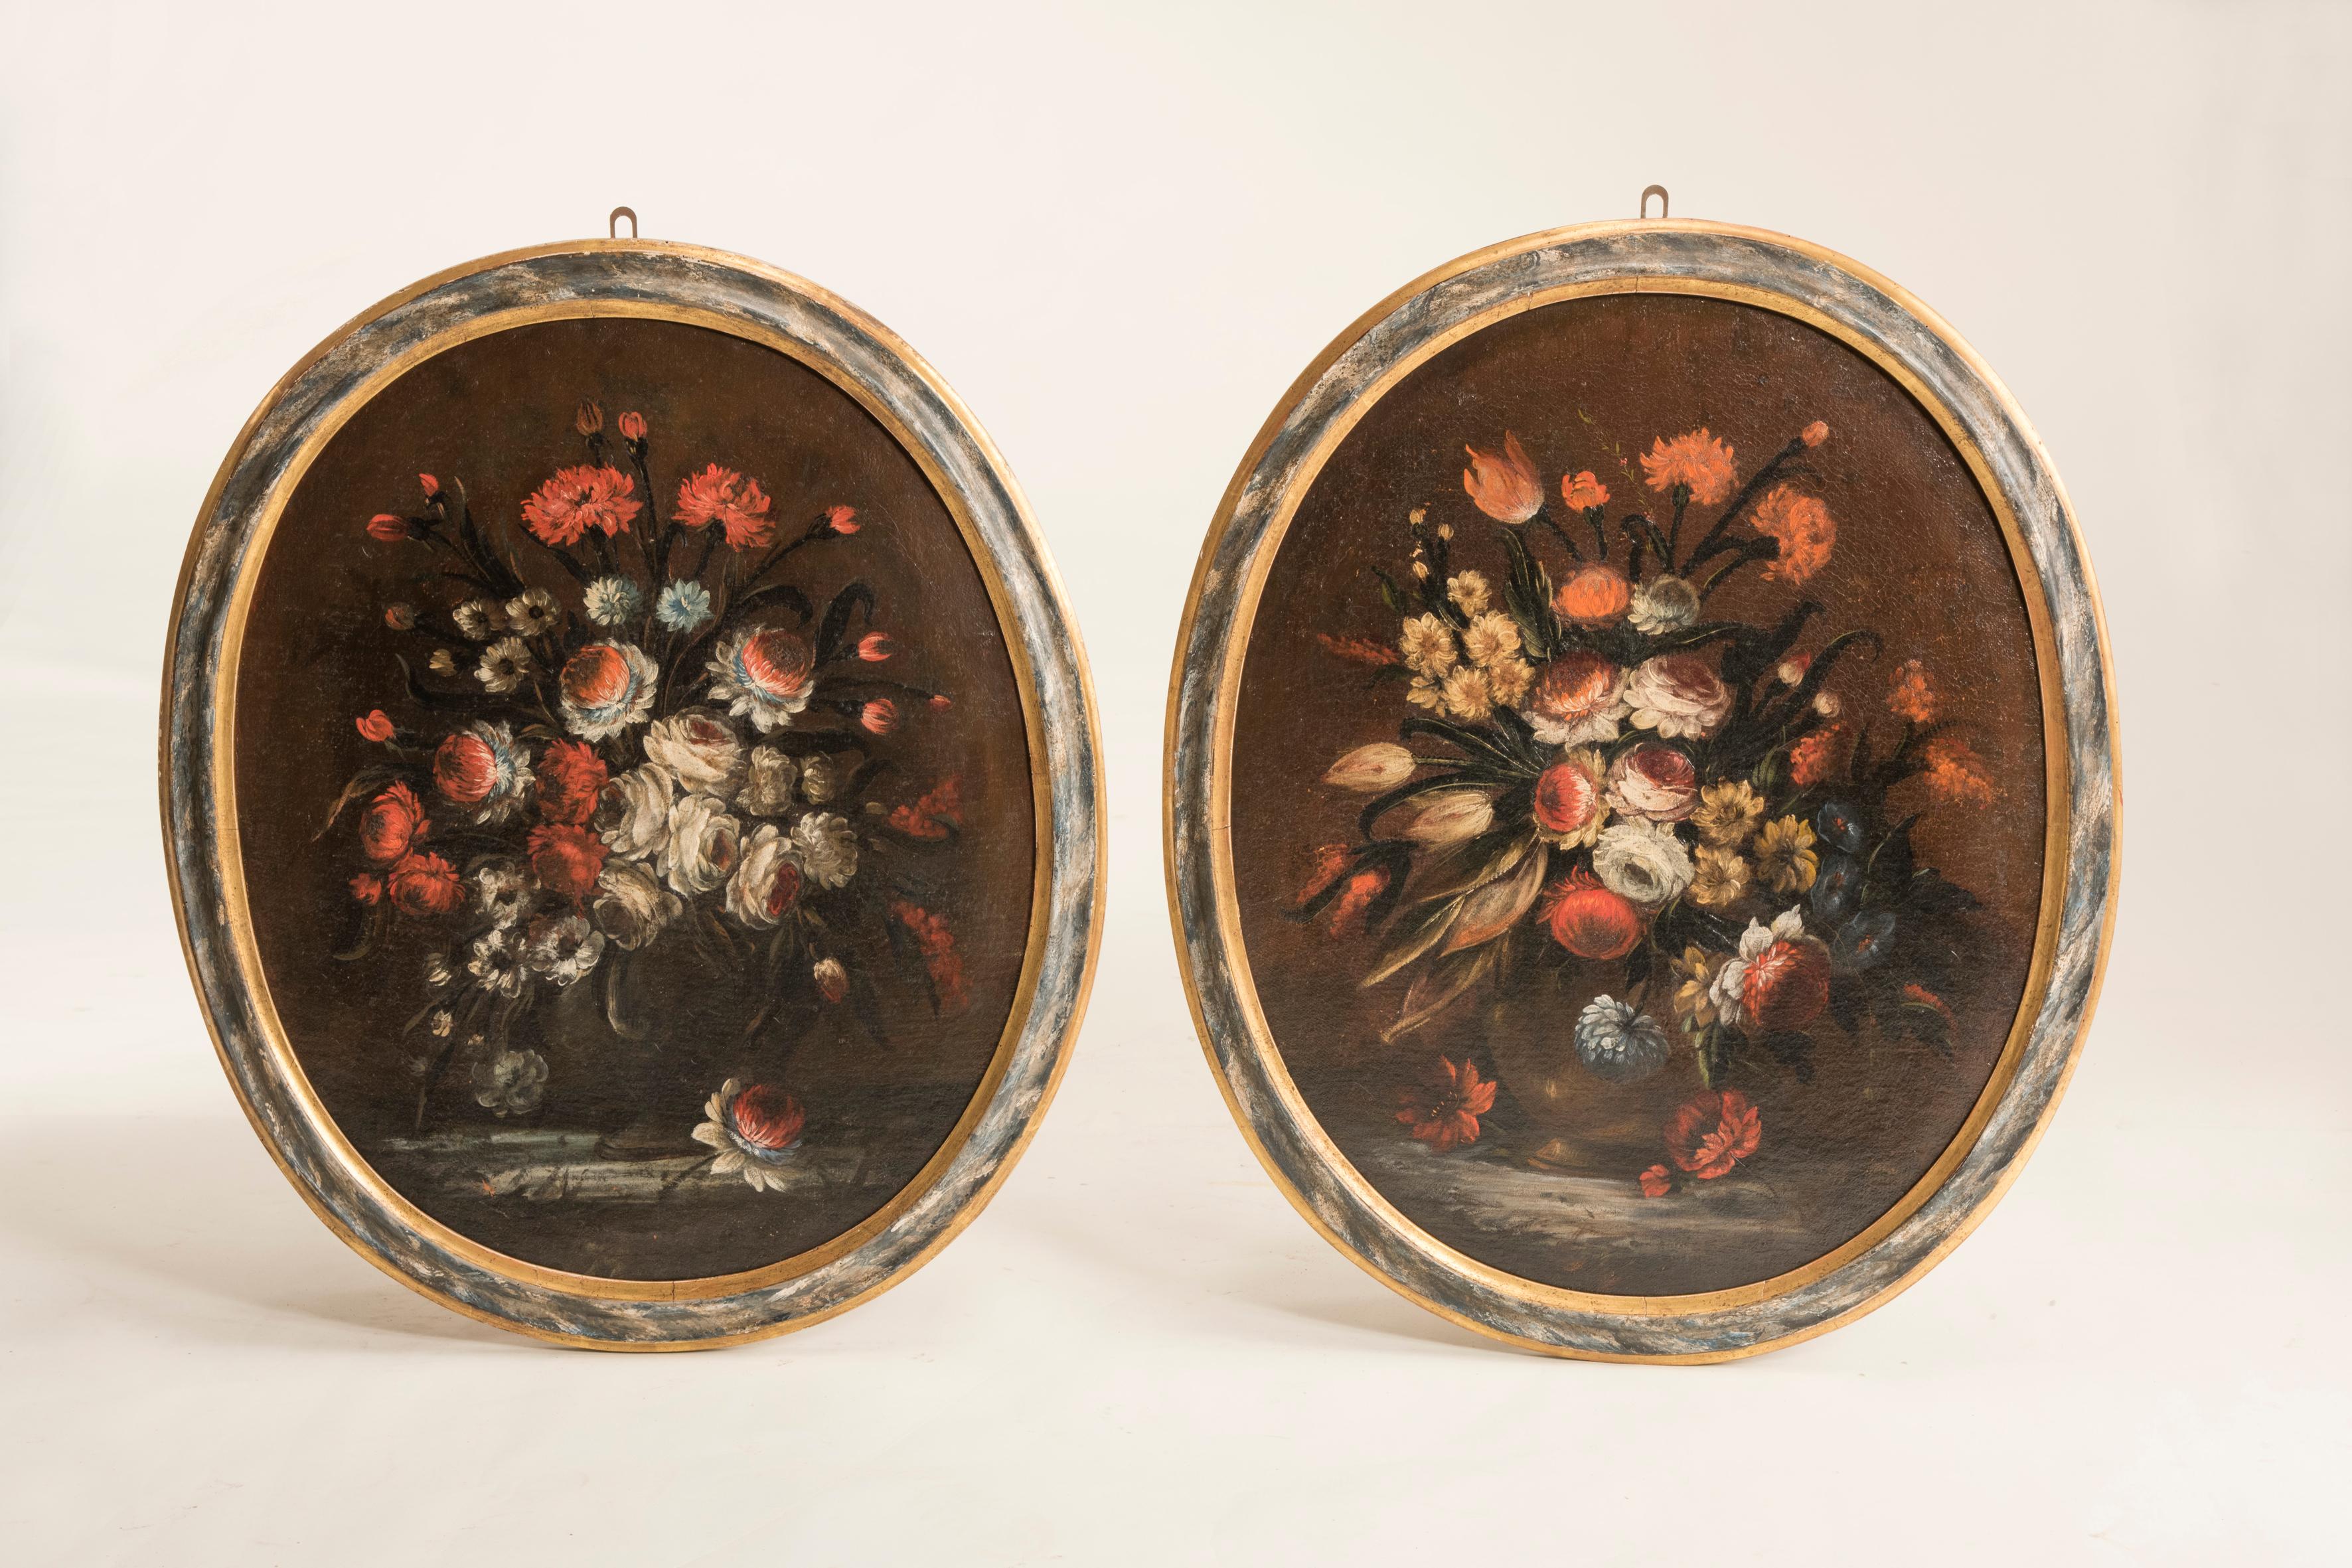 Late 17th-early 18th century Italian oval lacquered frames flowers still life, set of two paintings.
Lacquered wooden coeval frames.
Oil on canvas with dark background and finely defined flowers.
Restoration: cleaning and new canvas.
Size:
cm